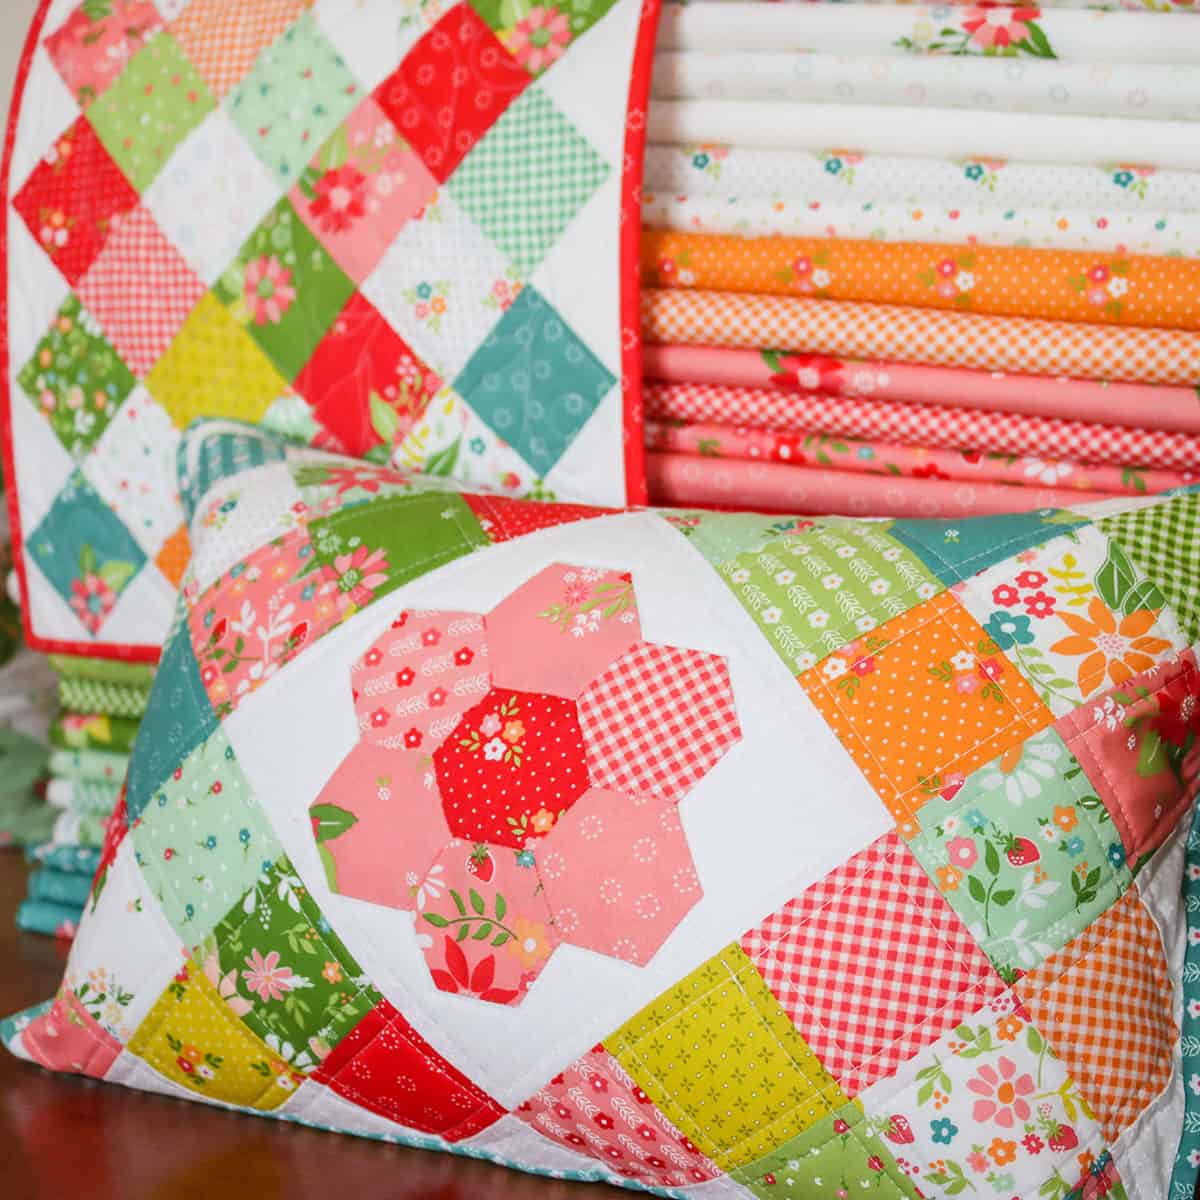 Patchwork pillow and table mat in colorful cotton fabrics